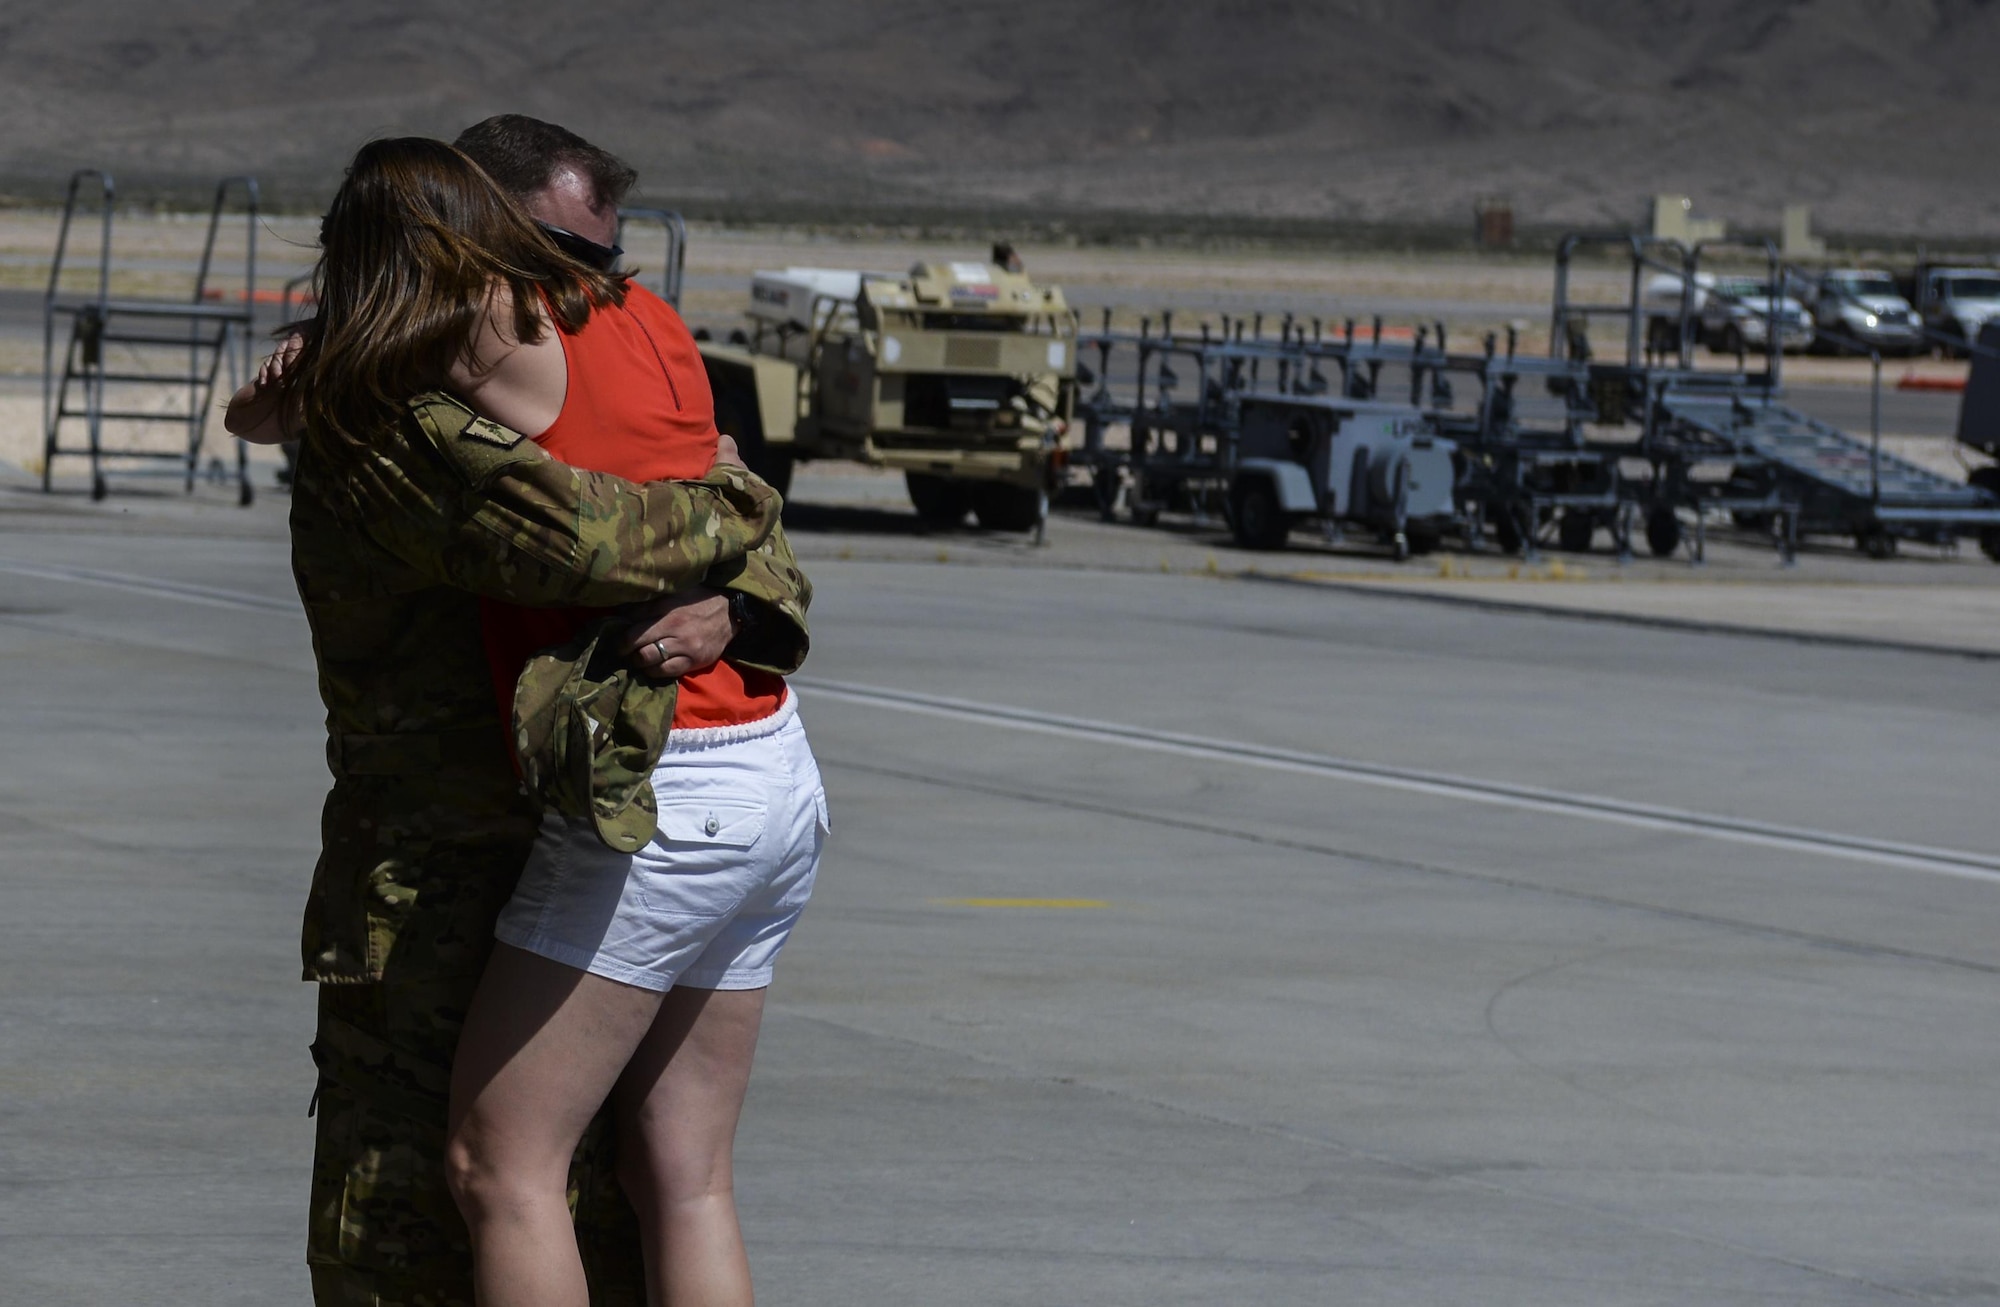 Staff Sgt. Adam Koniar, 66th Rescue Squadron Special Mission Aviator Instructor, embraces his wife after returning home from deployment at Nellis Air Force Base, Nev., June 7. The primary mission of the deployment was personnel recovery support through all of Afghanistan. (U.S. Air Force photo by Airman 1st Class Kevin Tanenbaum)